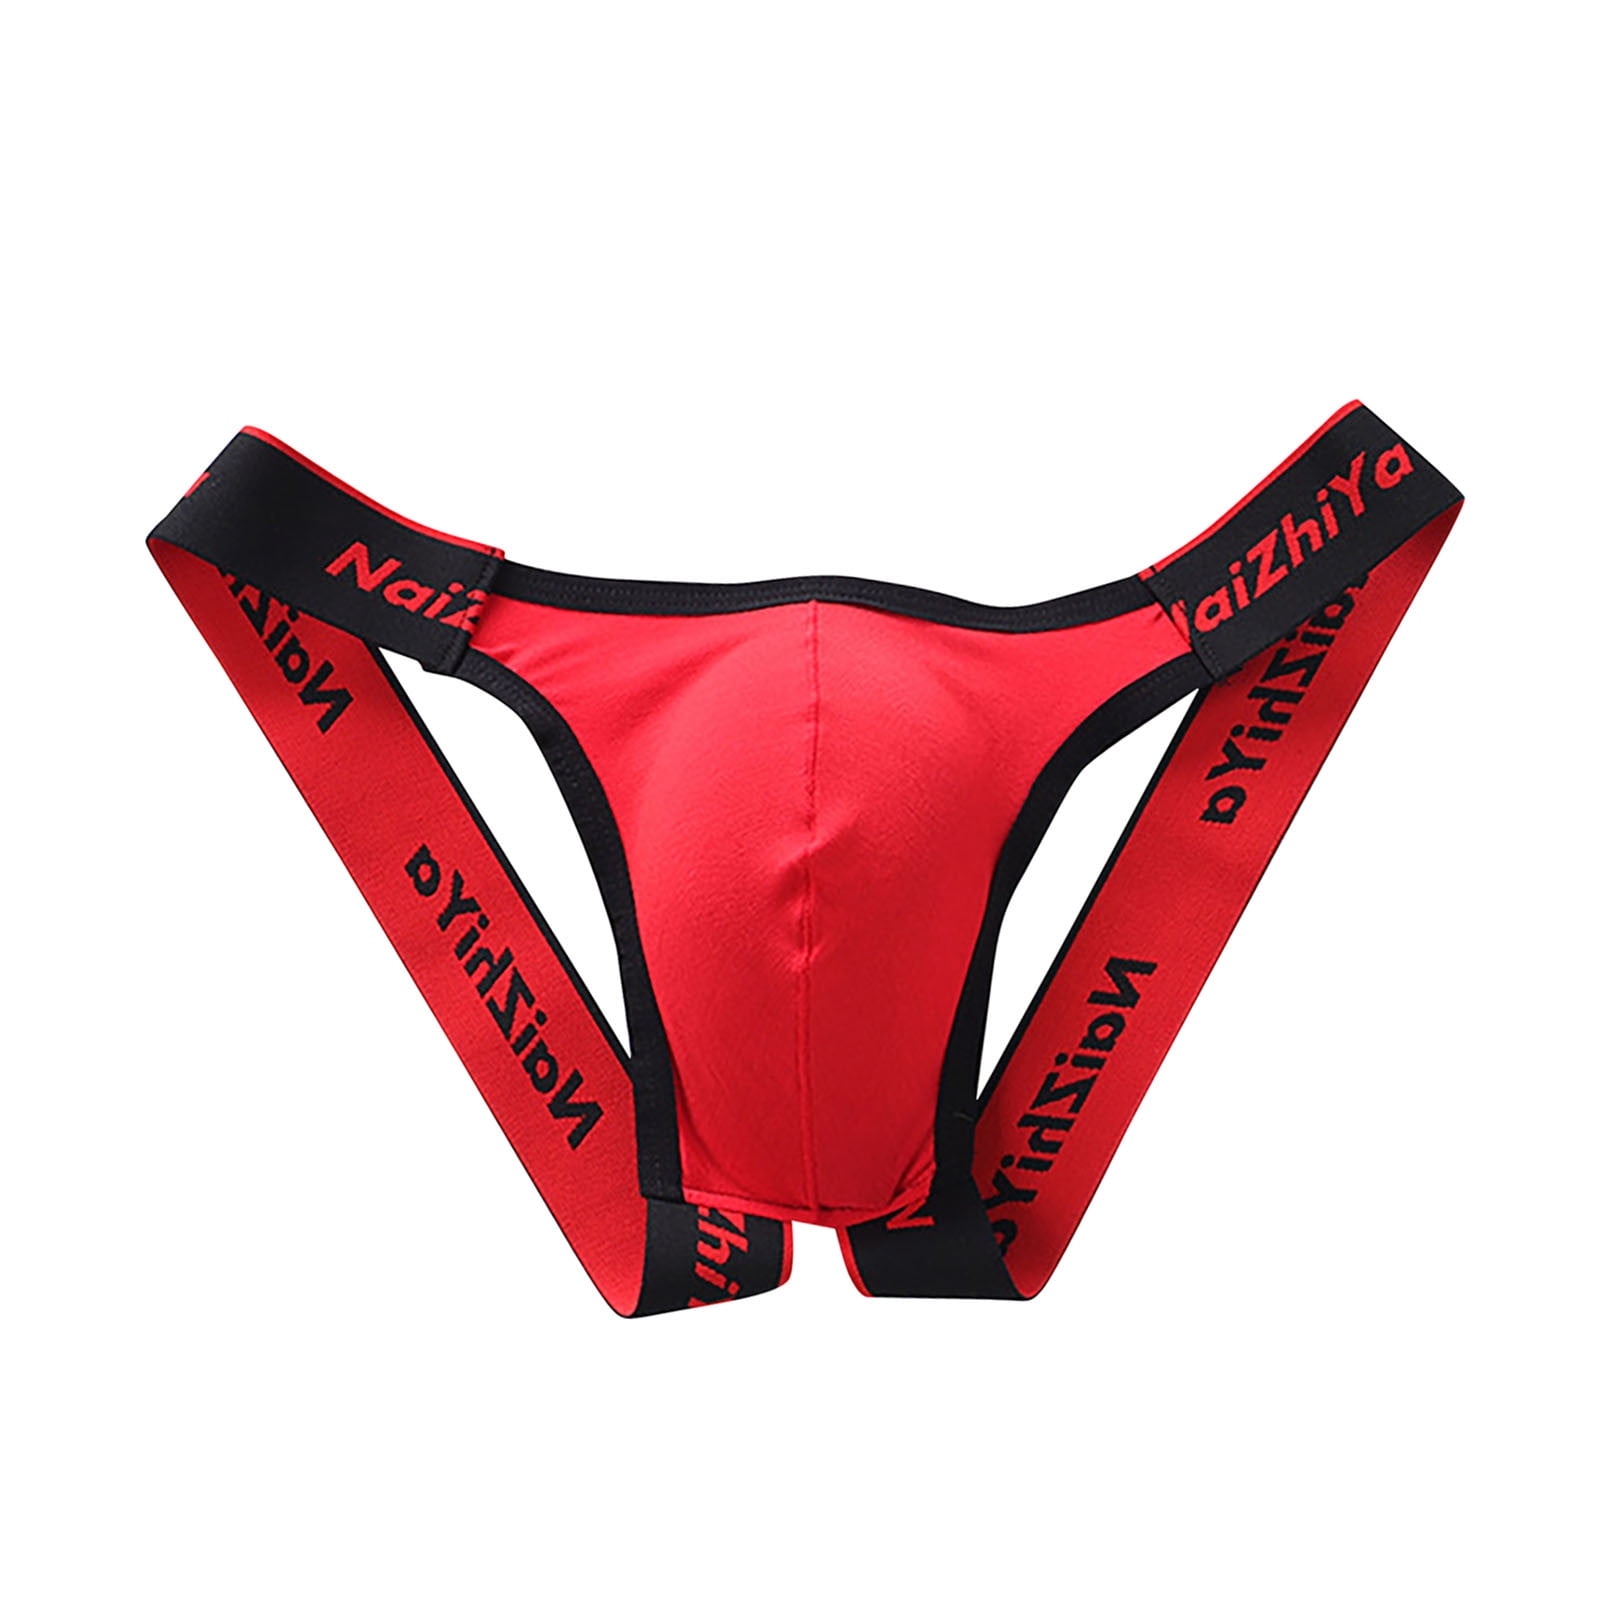 Qcmgmg Sexy Thongs for Men Stretch Athletic Supporter G-String Low